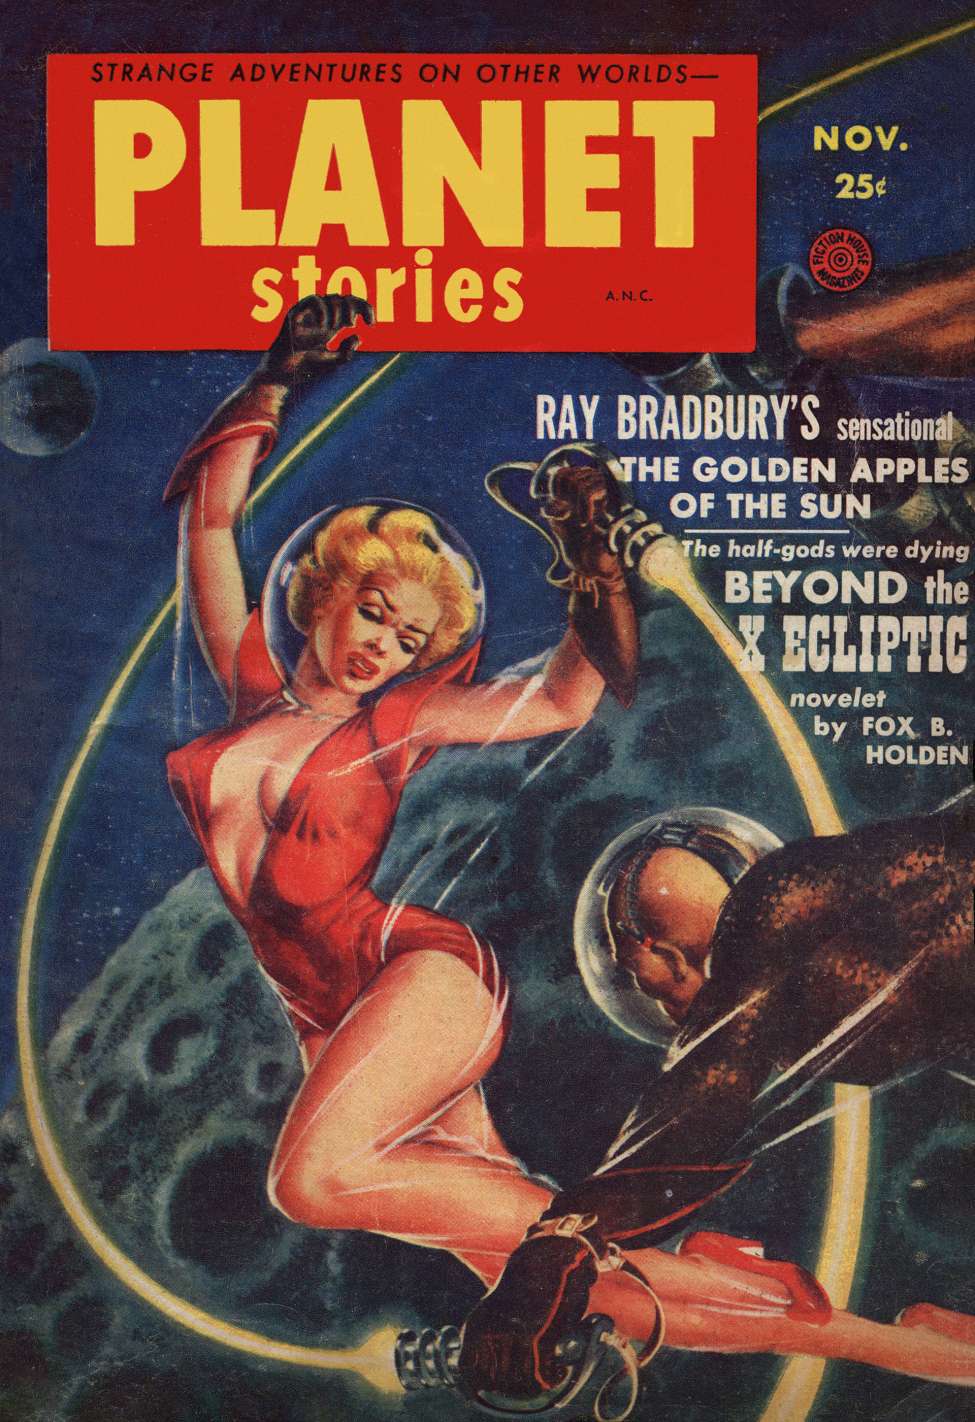 Comic Book Cover For Planet Stories v6 3 - The Golden Apples of the Sun - Ray Bradbury